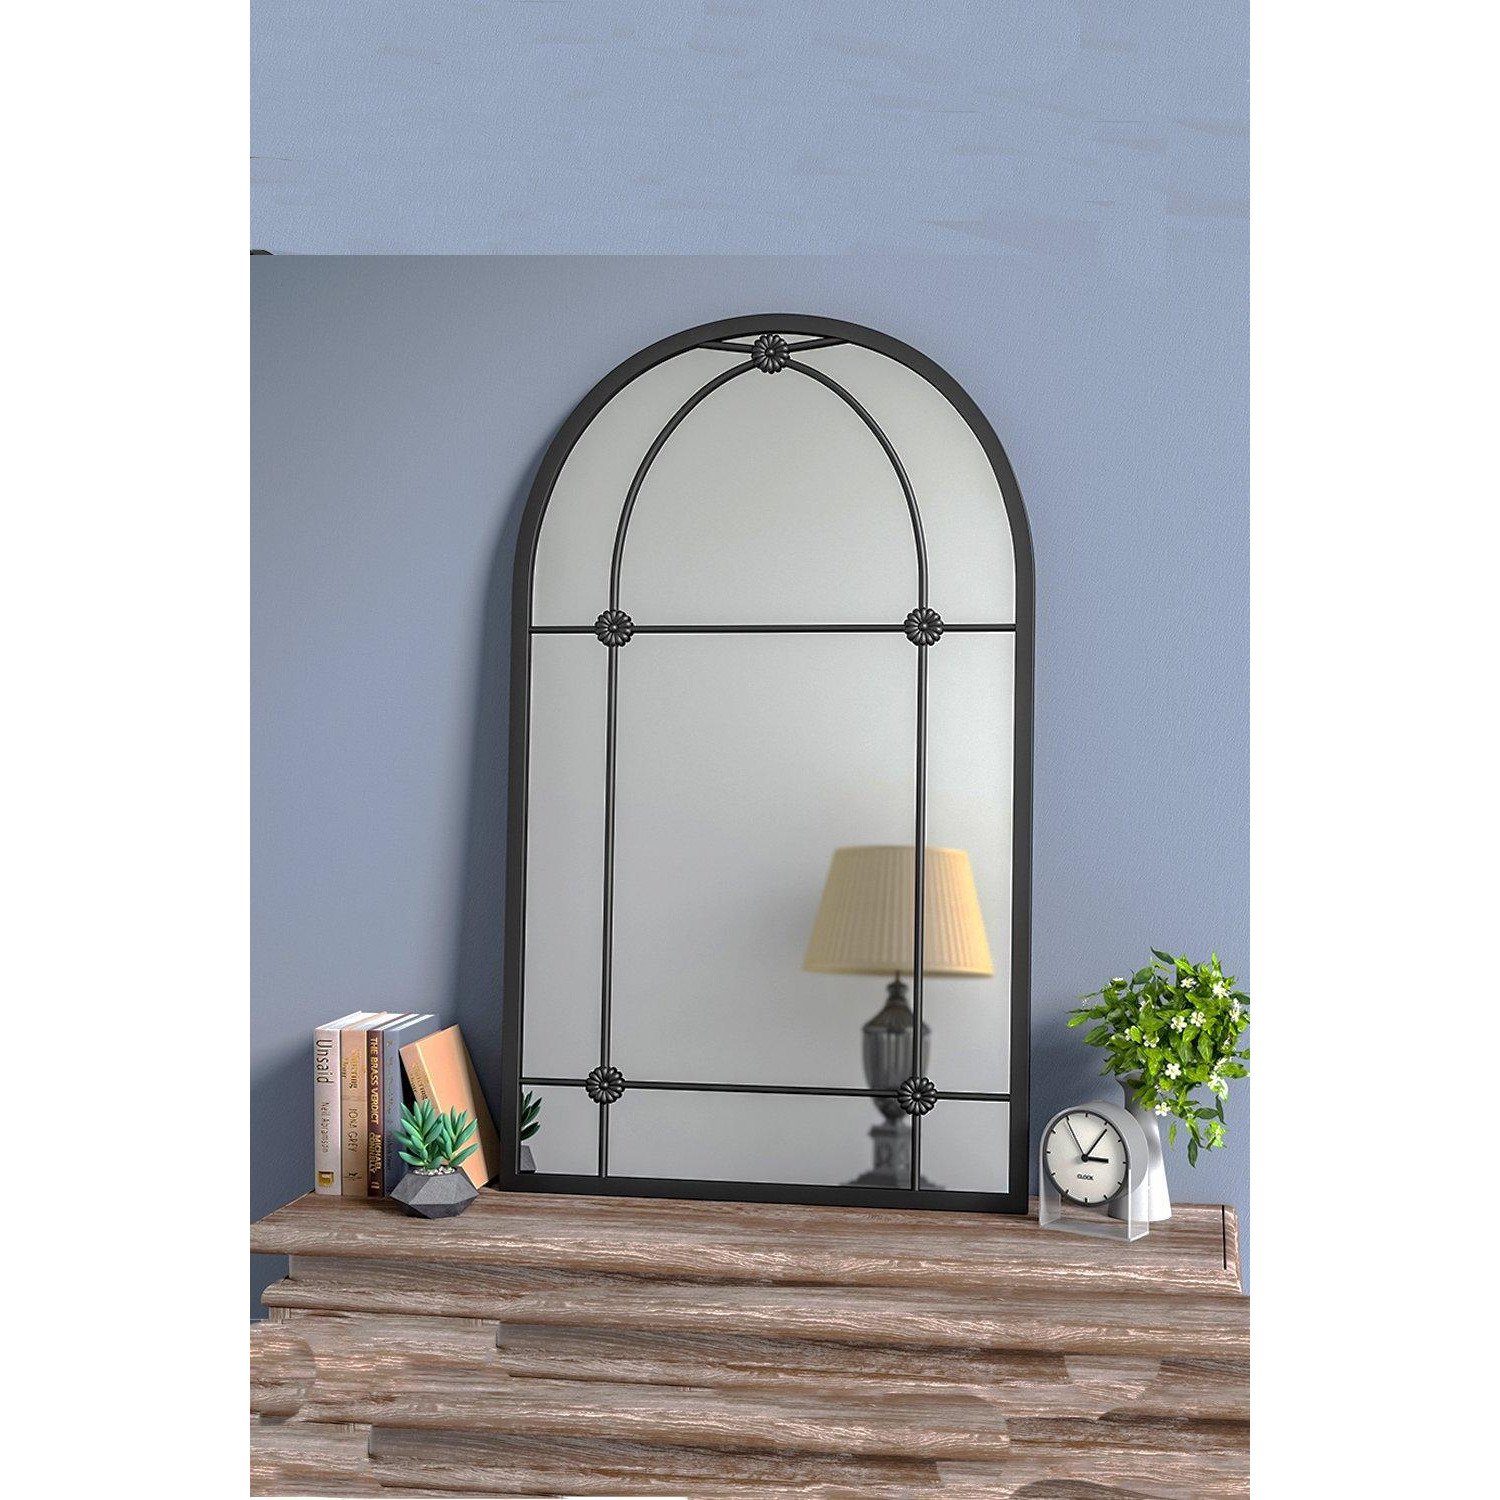 Metal Arched Window Mirror - image 1